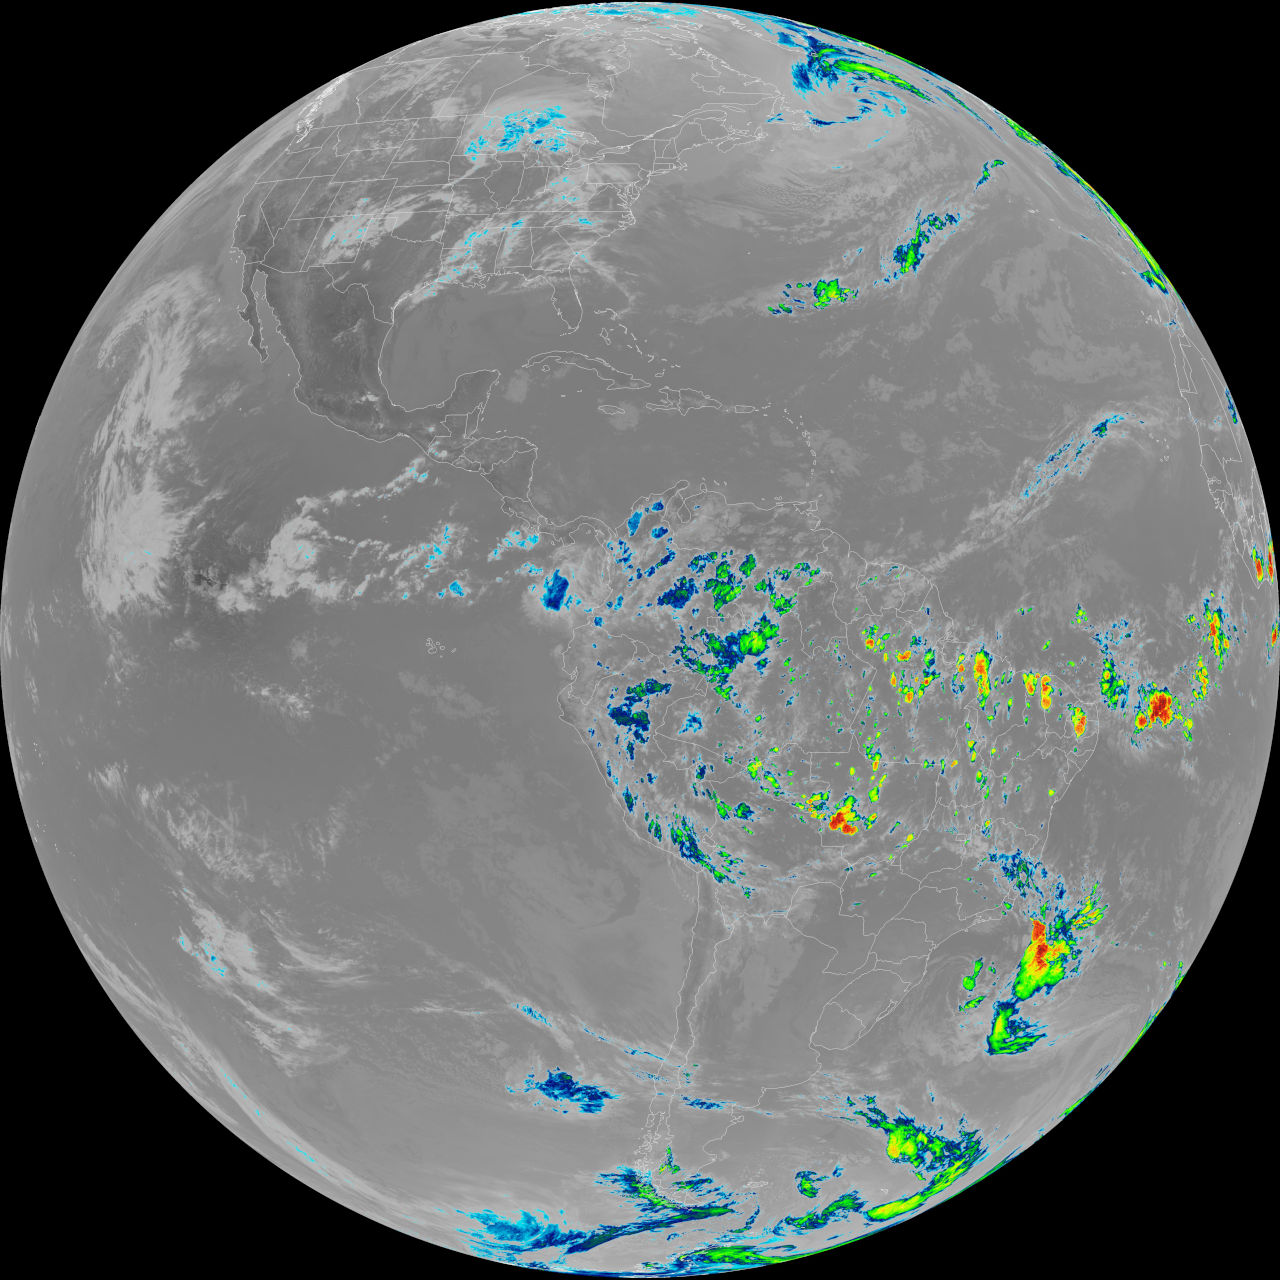 Full disk image of the Earth received from GOES 16 Channel 7.